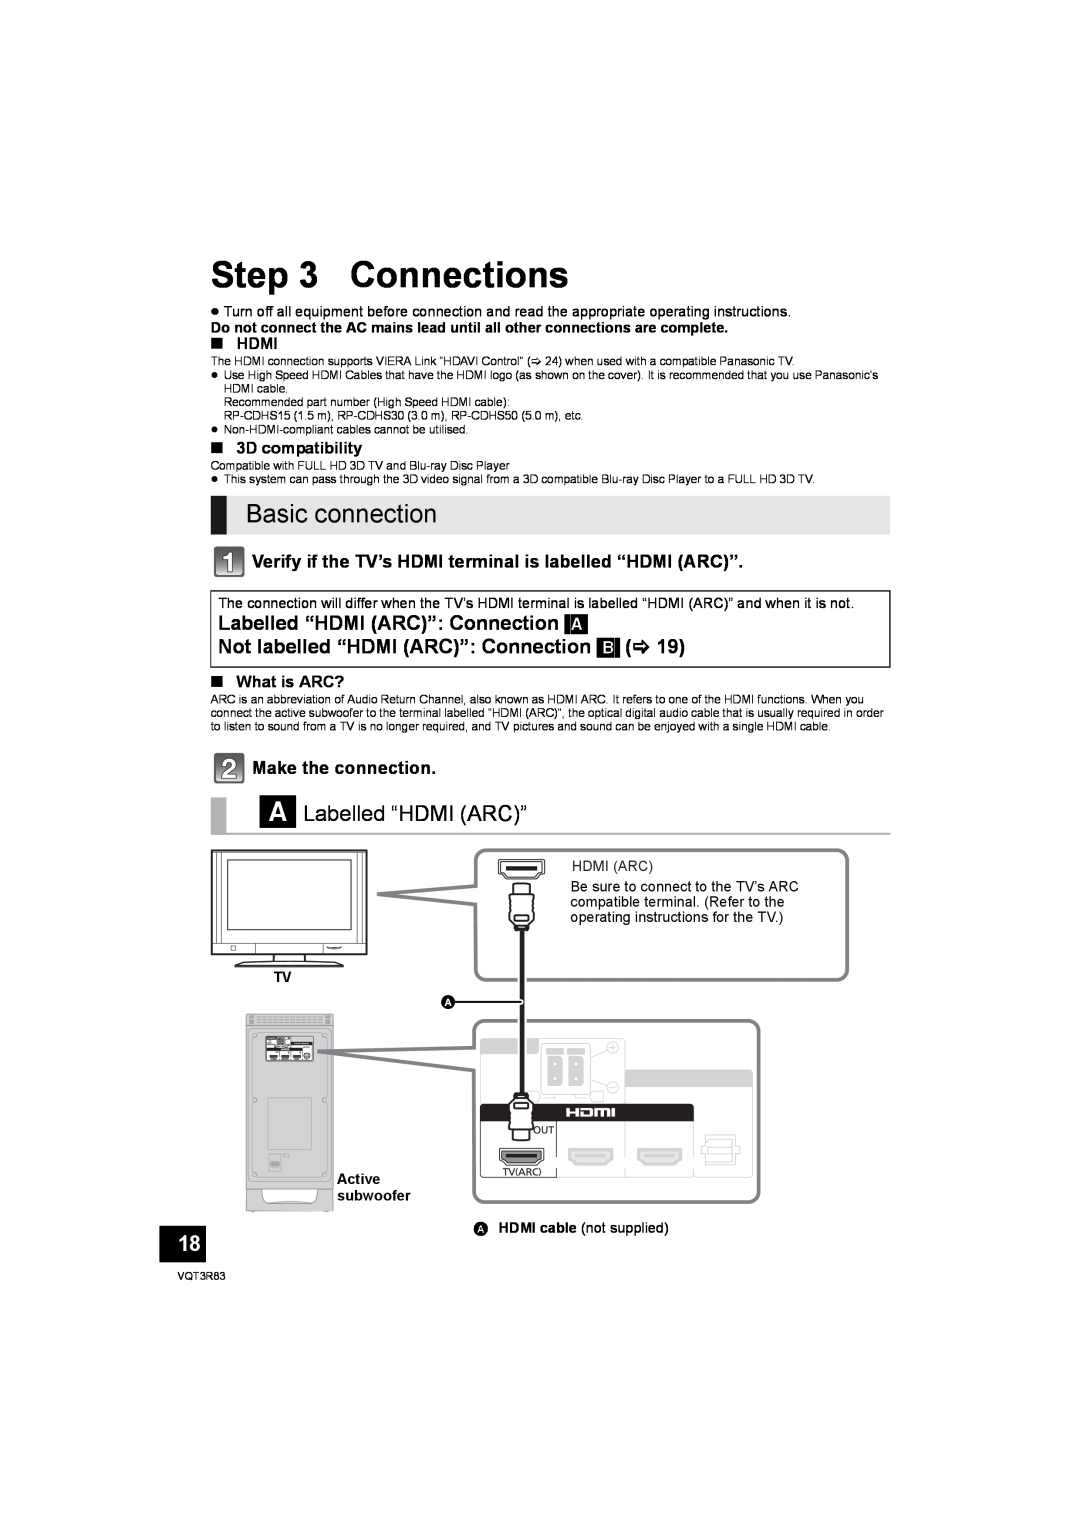 Panasonic SC-HTB15 Connections, Basic connection, A Labelled “HDMI ARC”, Make the connection, Hdmi, 3D compatibility 